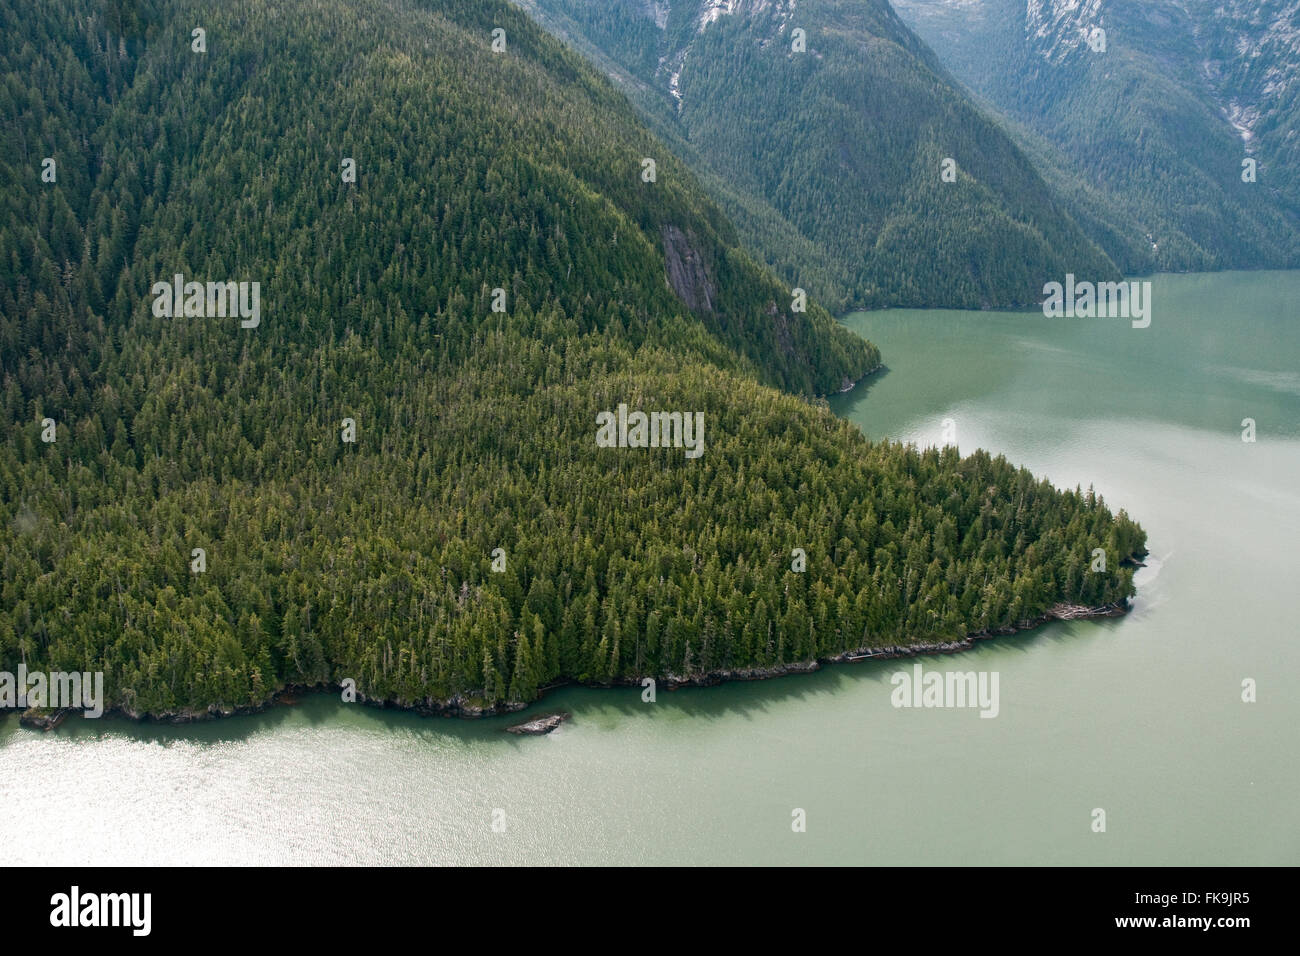 An aerial view of the glacial silt filled waters of Rivers Inlet in the Great Bear Rainforest of British Columbia, Canada. Stock Photo